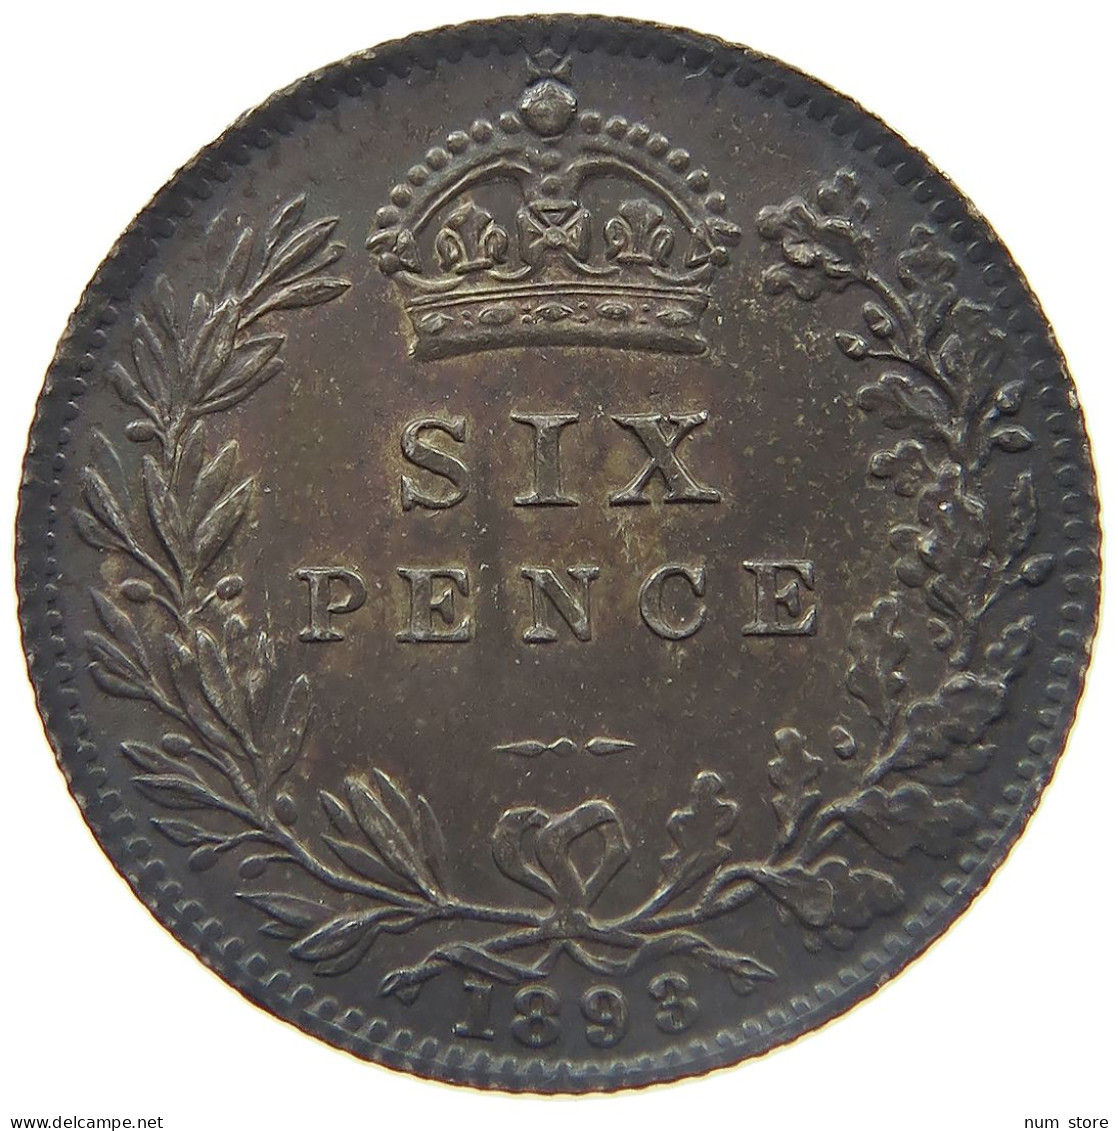 GREAT BRITAIN SIXPENCE 1893 VICTORIA 1837-1901 #MA 022958 - H. 6 Pence